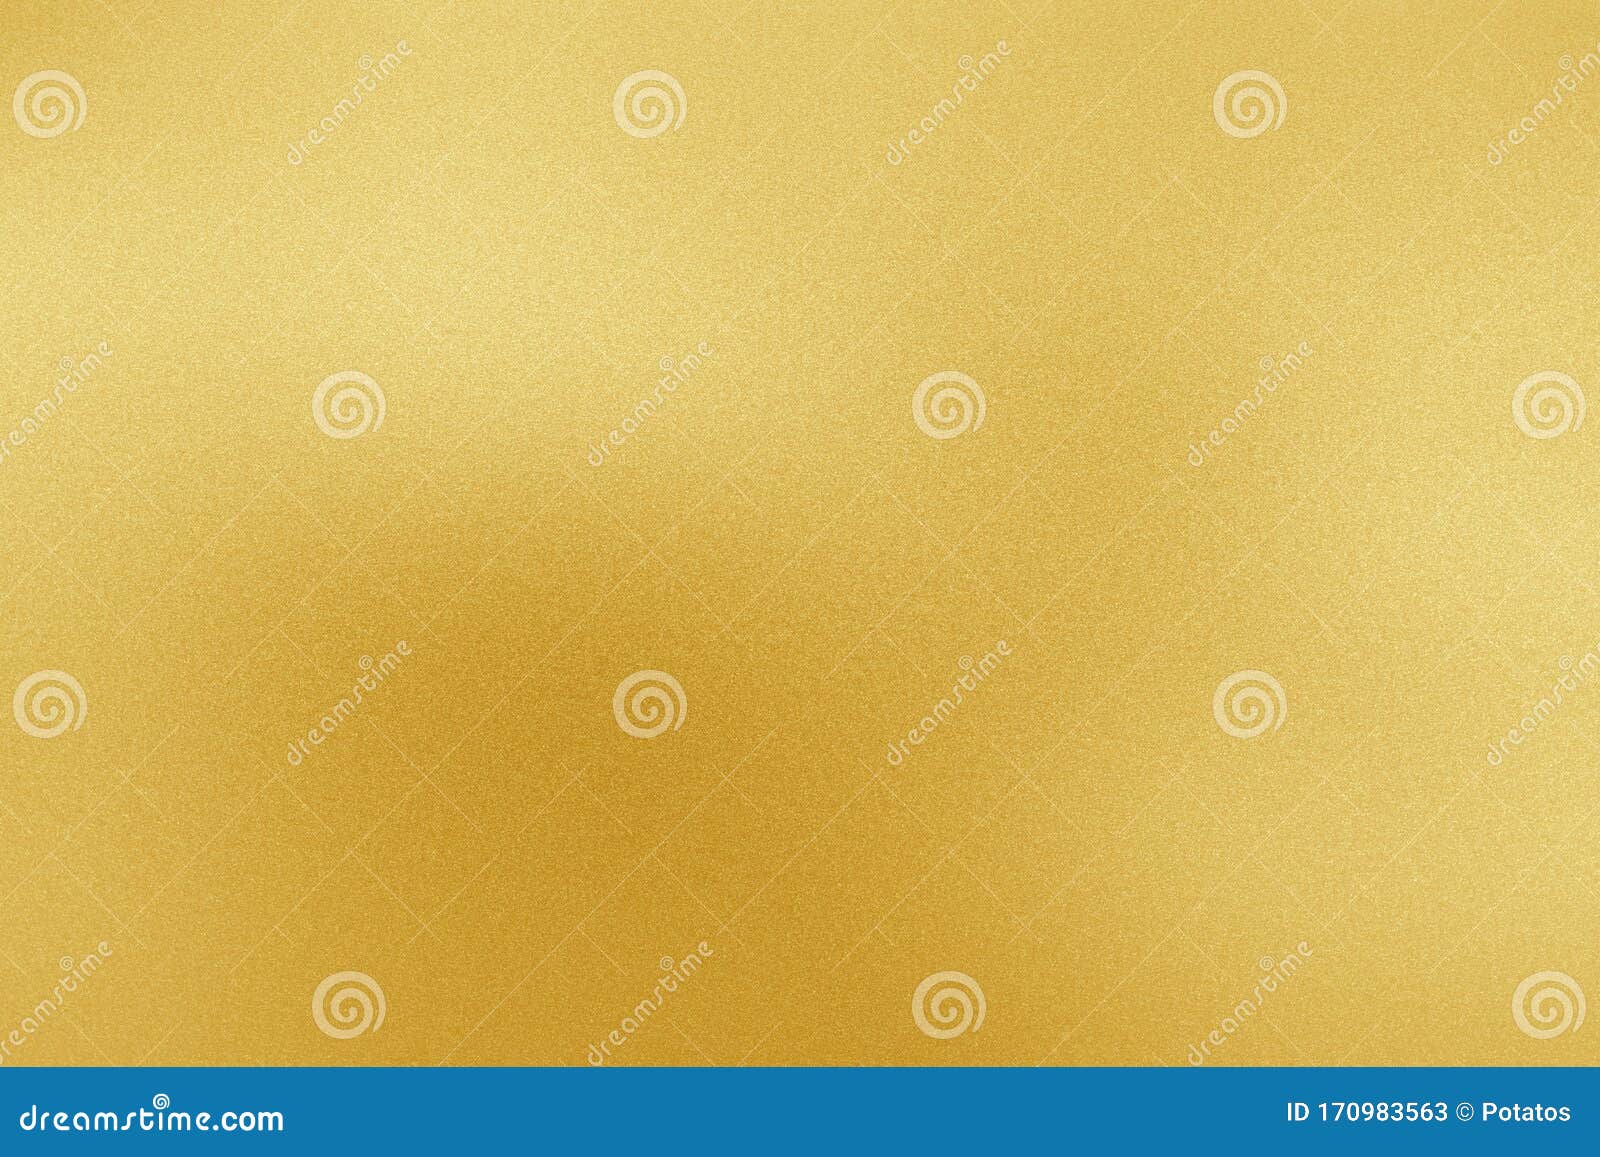 gold metal texture background. golden shiny metallic plate textured flat surface with smooth light reflection